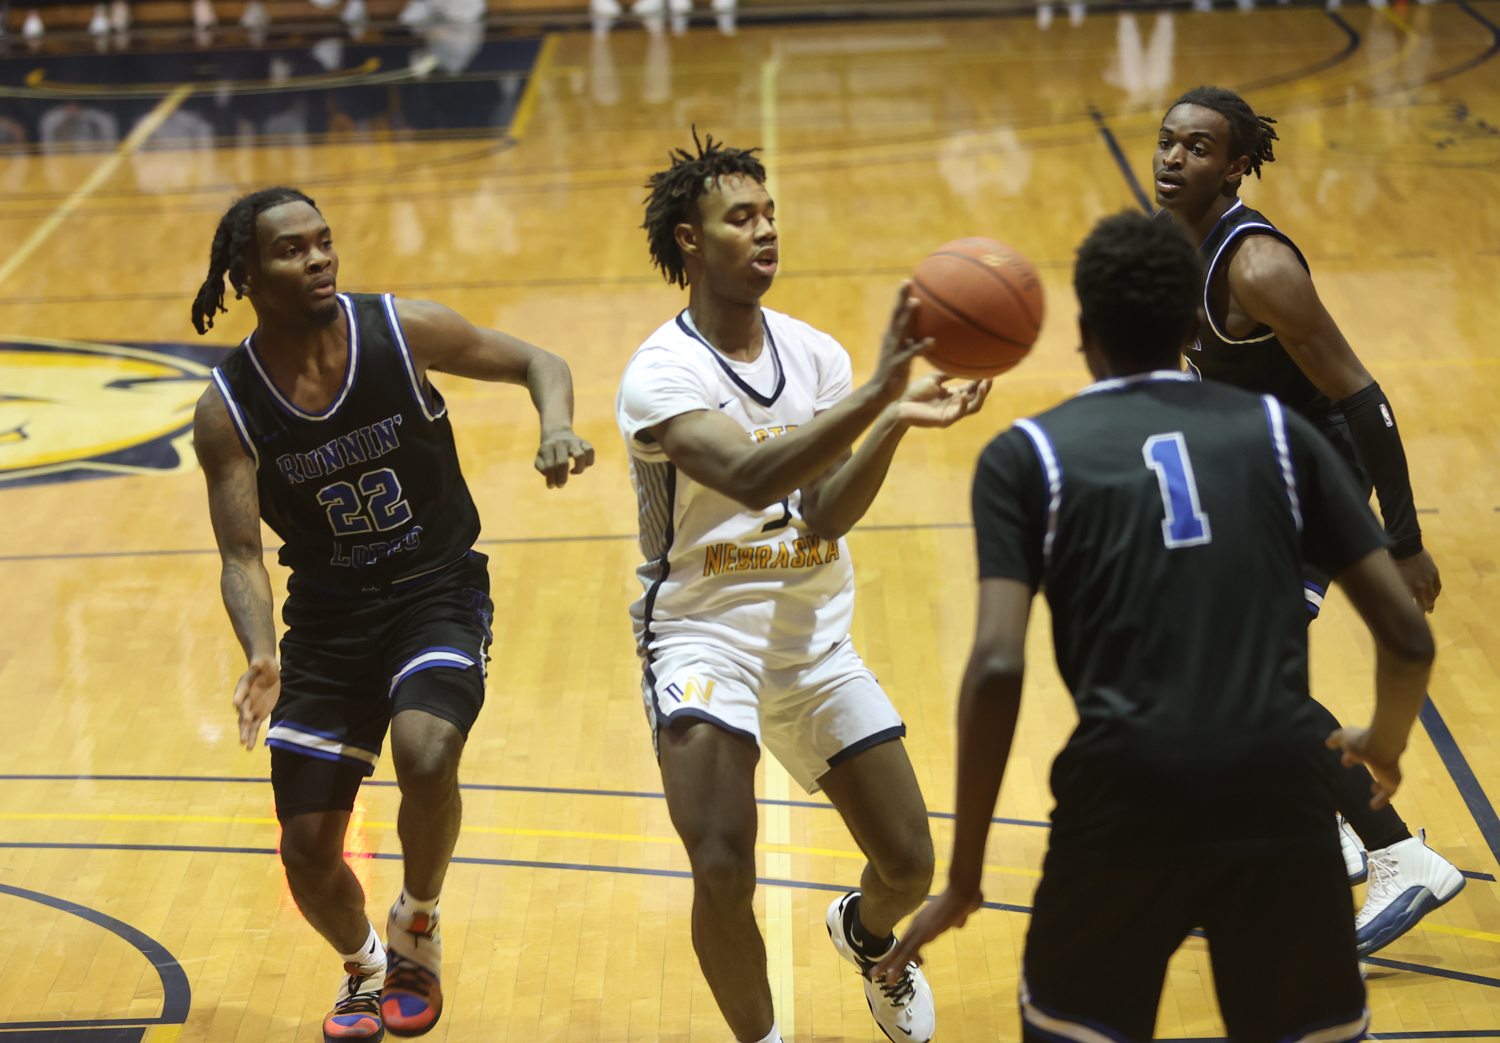 WNCC men advance with 1st round win